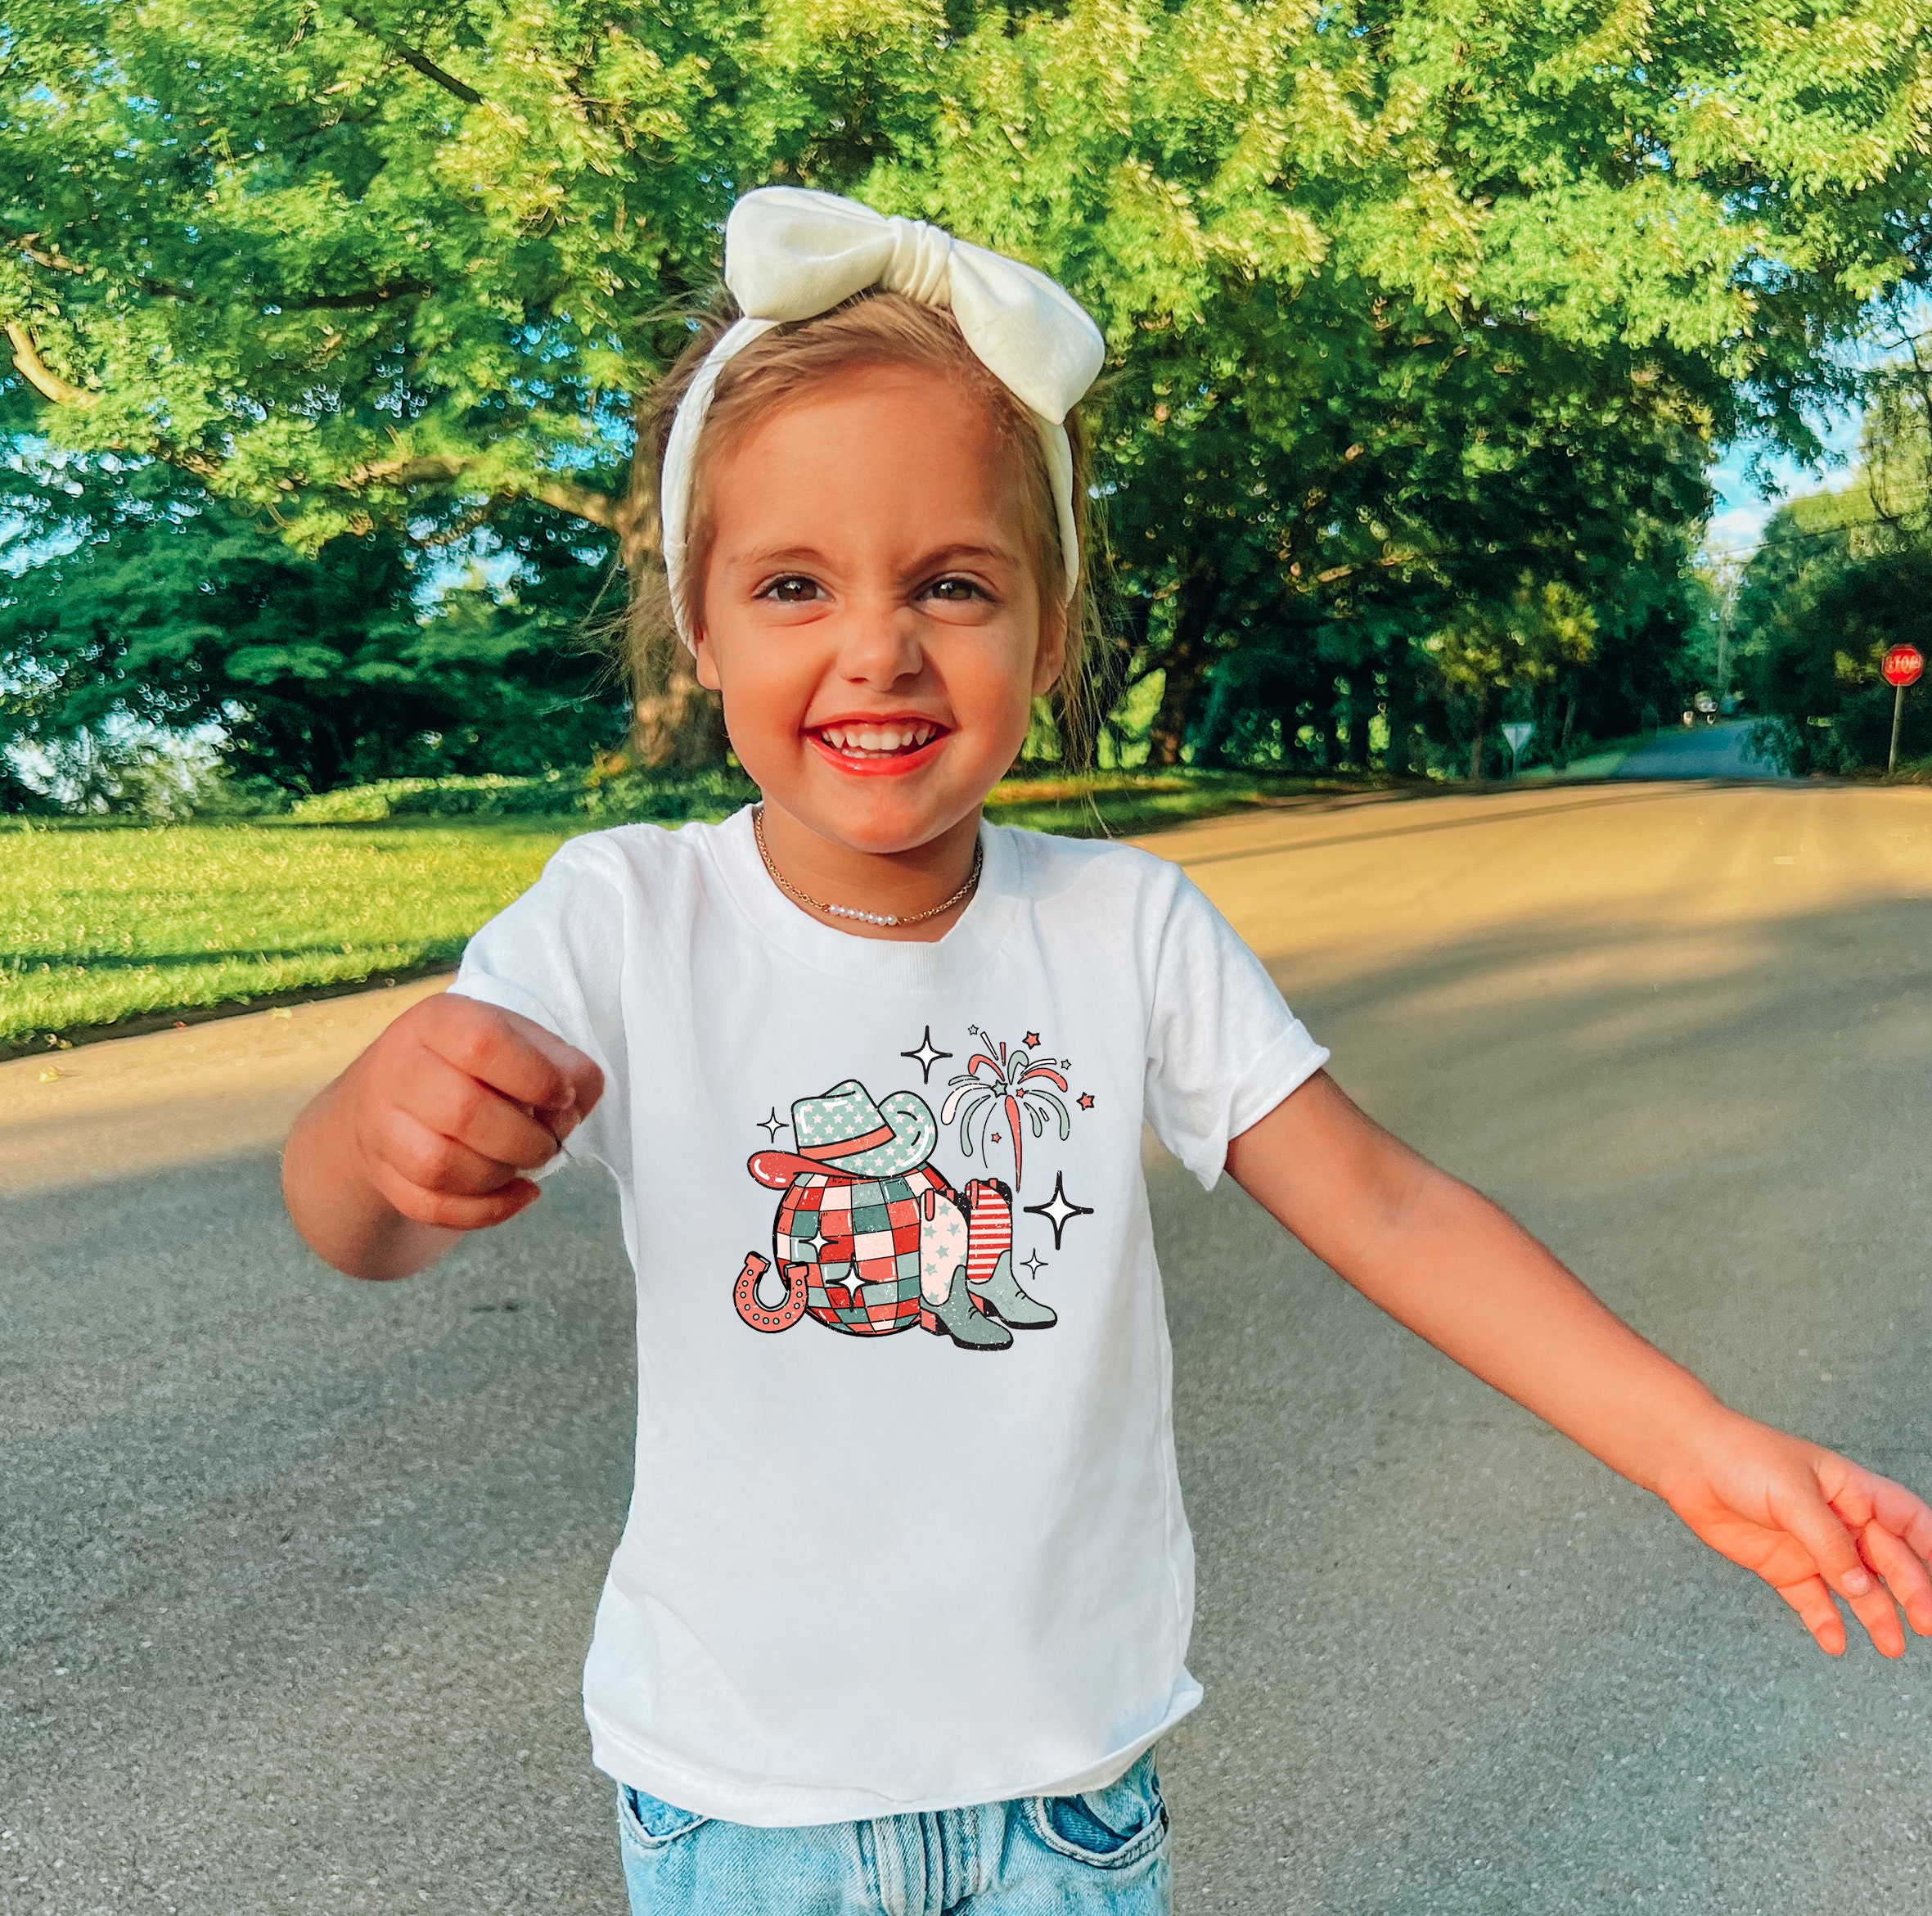 Discover Howdy America Toddler T-shirt, America Retro Tee, 4th of July Kids Tee, American Cowboy Kids Tee, Retro Natural Infant, Memorial Day T-Shirt